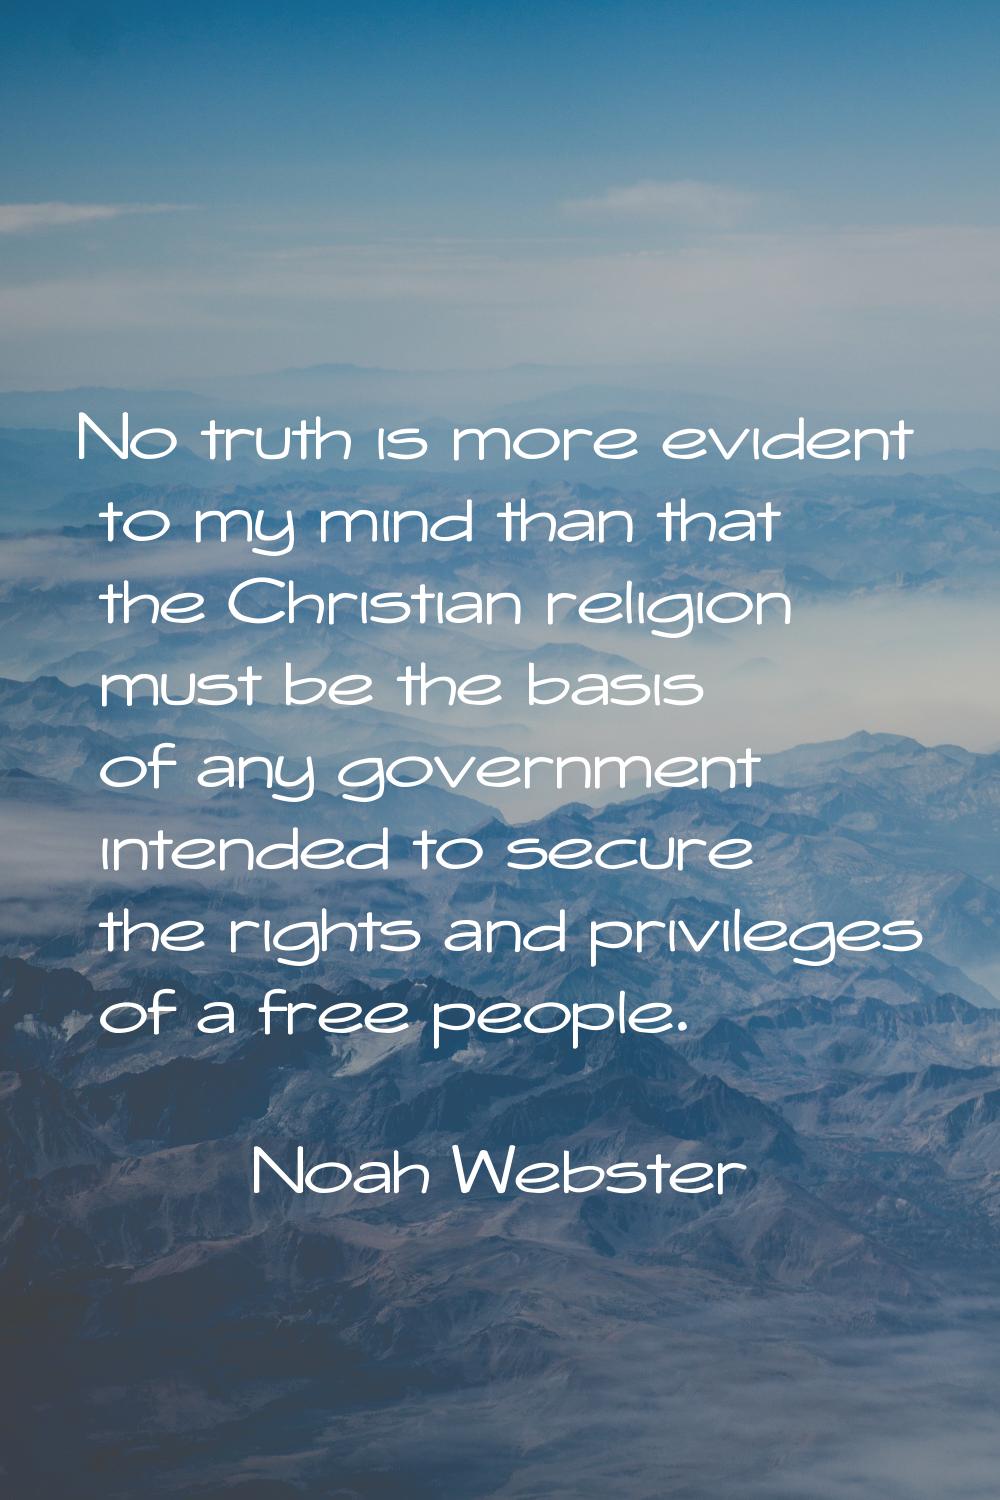 No truth is more evident to my mind than that the Christian religion must be the basis of any gover